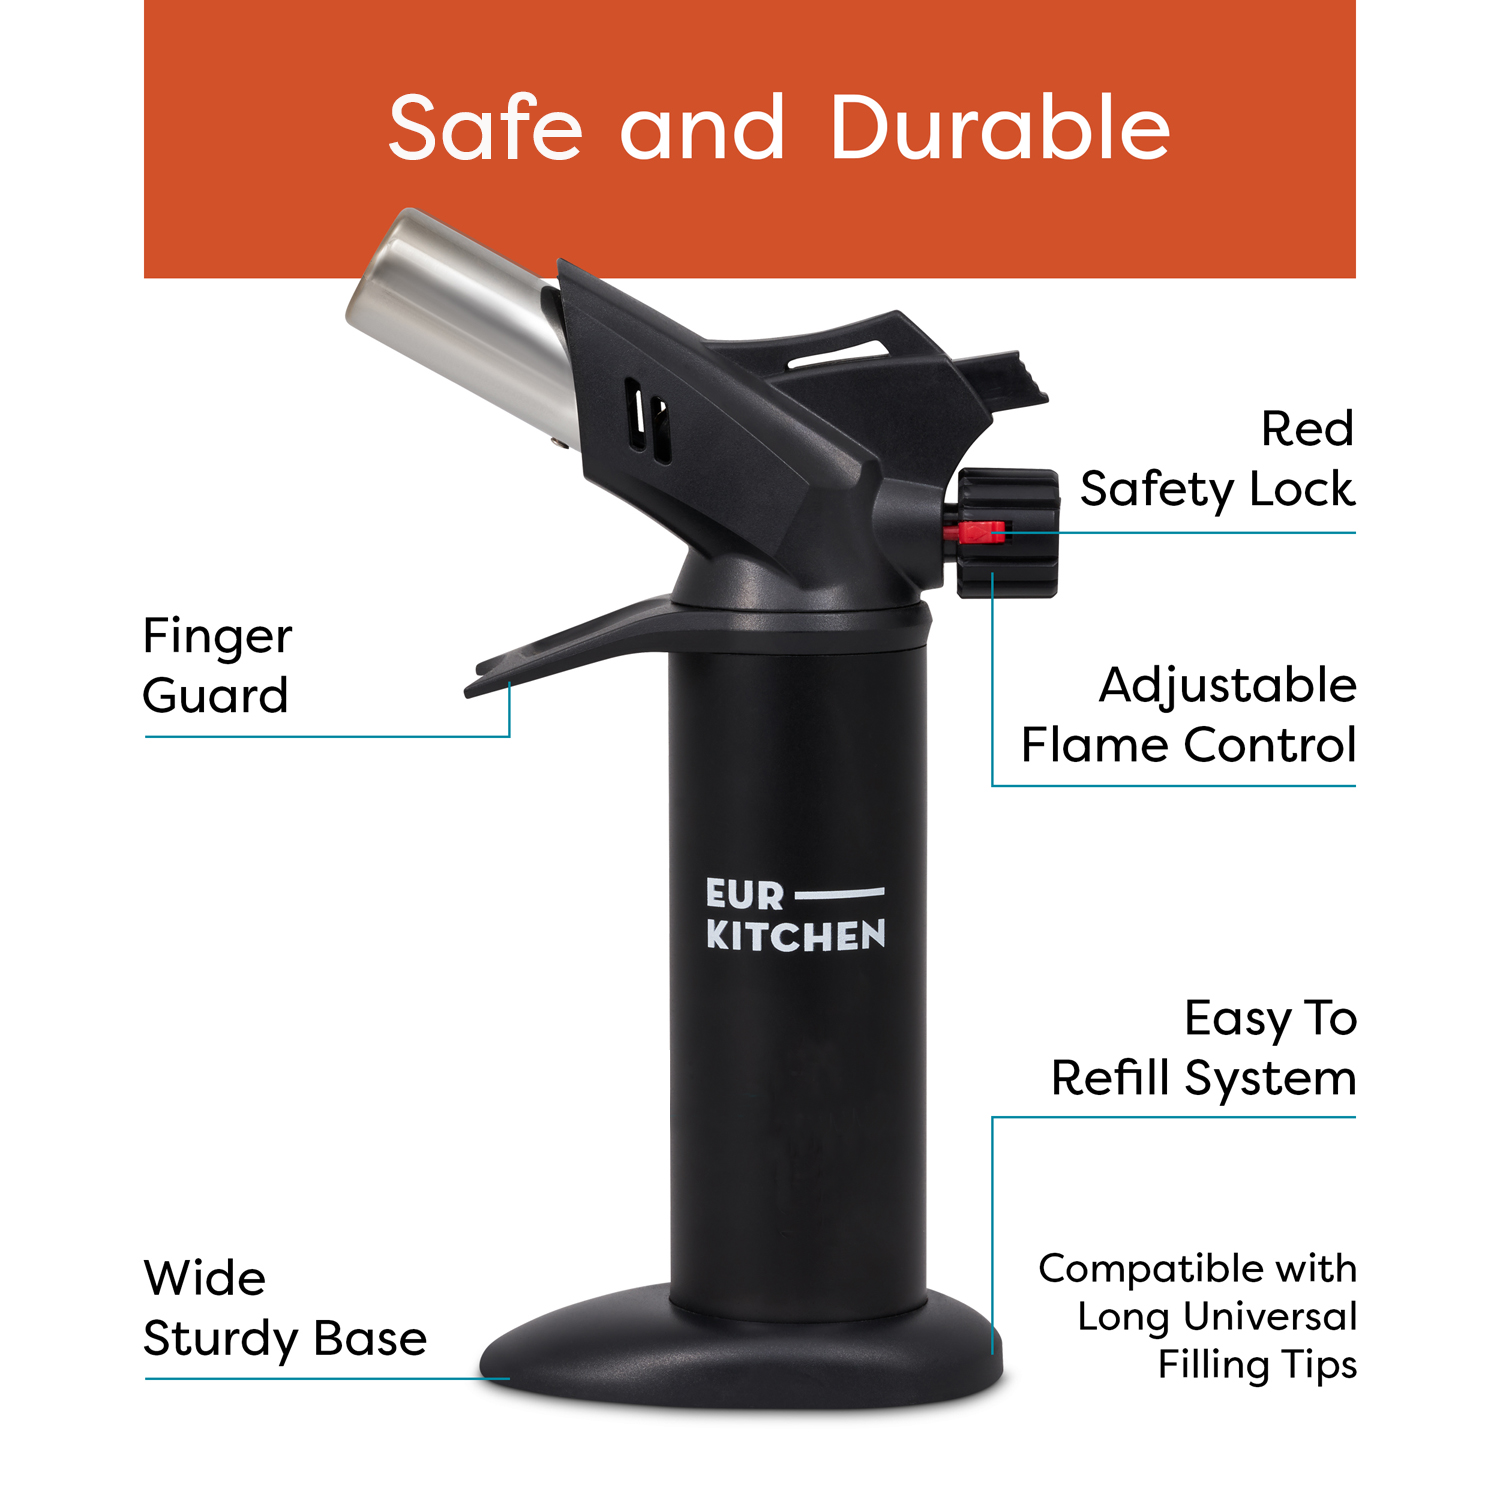 EurKitchen - Large Culinary Butane Torch with Safety Lock, Adjustable Flame & More - Black - image 2 of 6